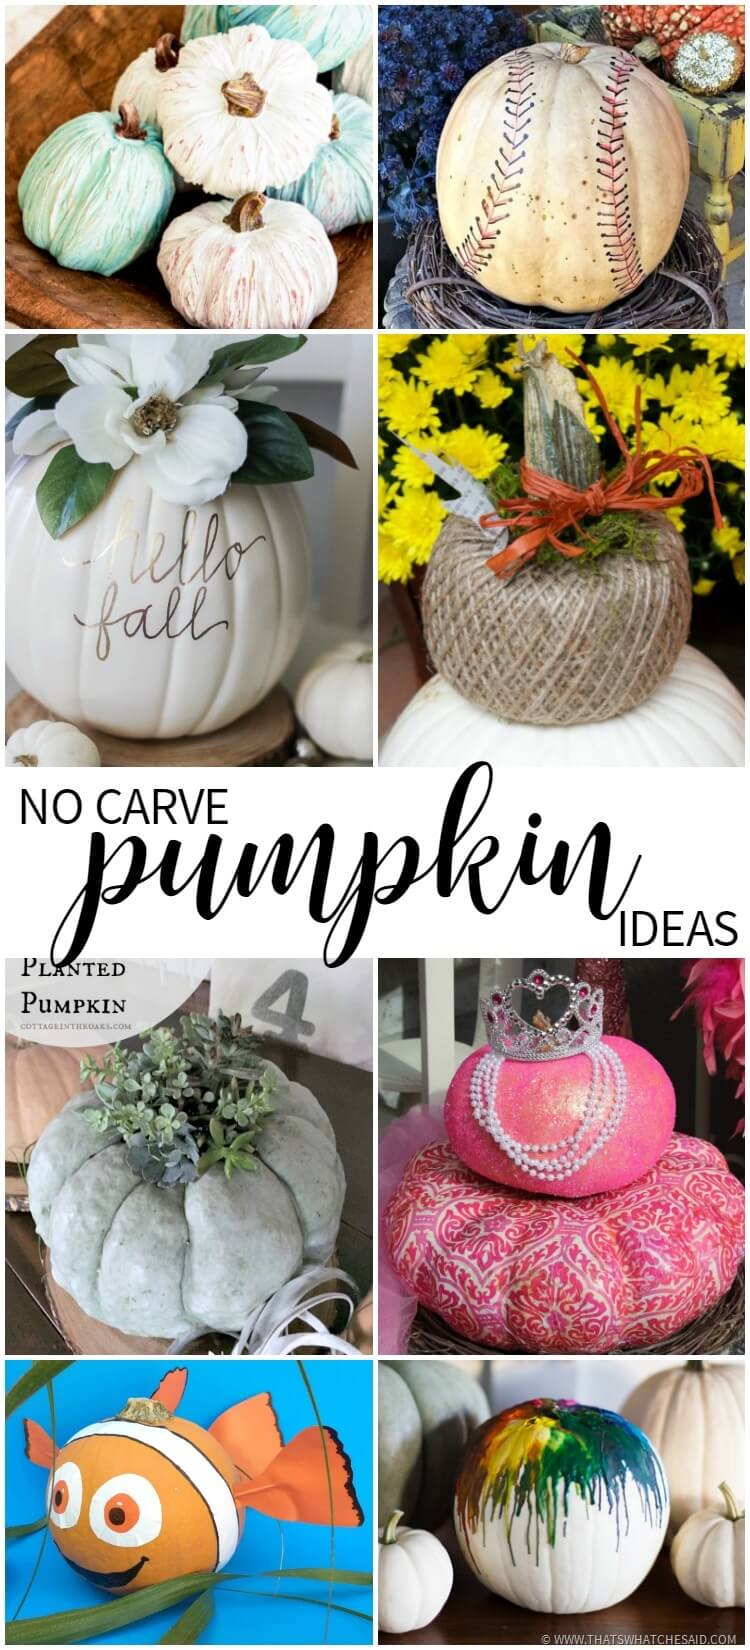 No Carve Pumpkin Ideas at Monday Funday Link Party